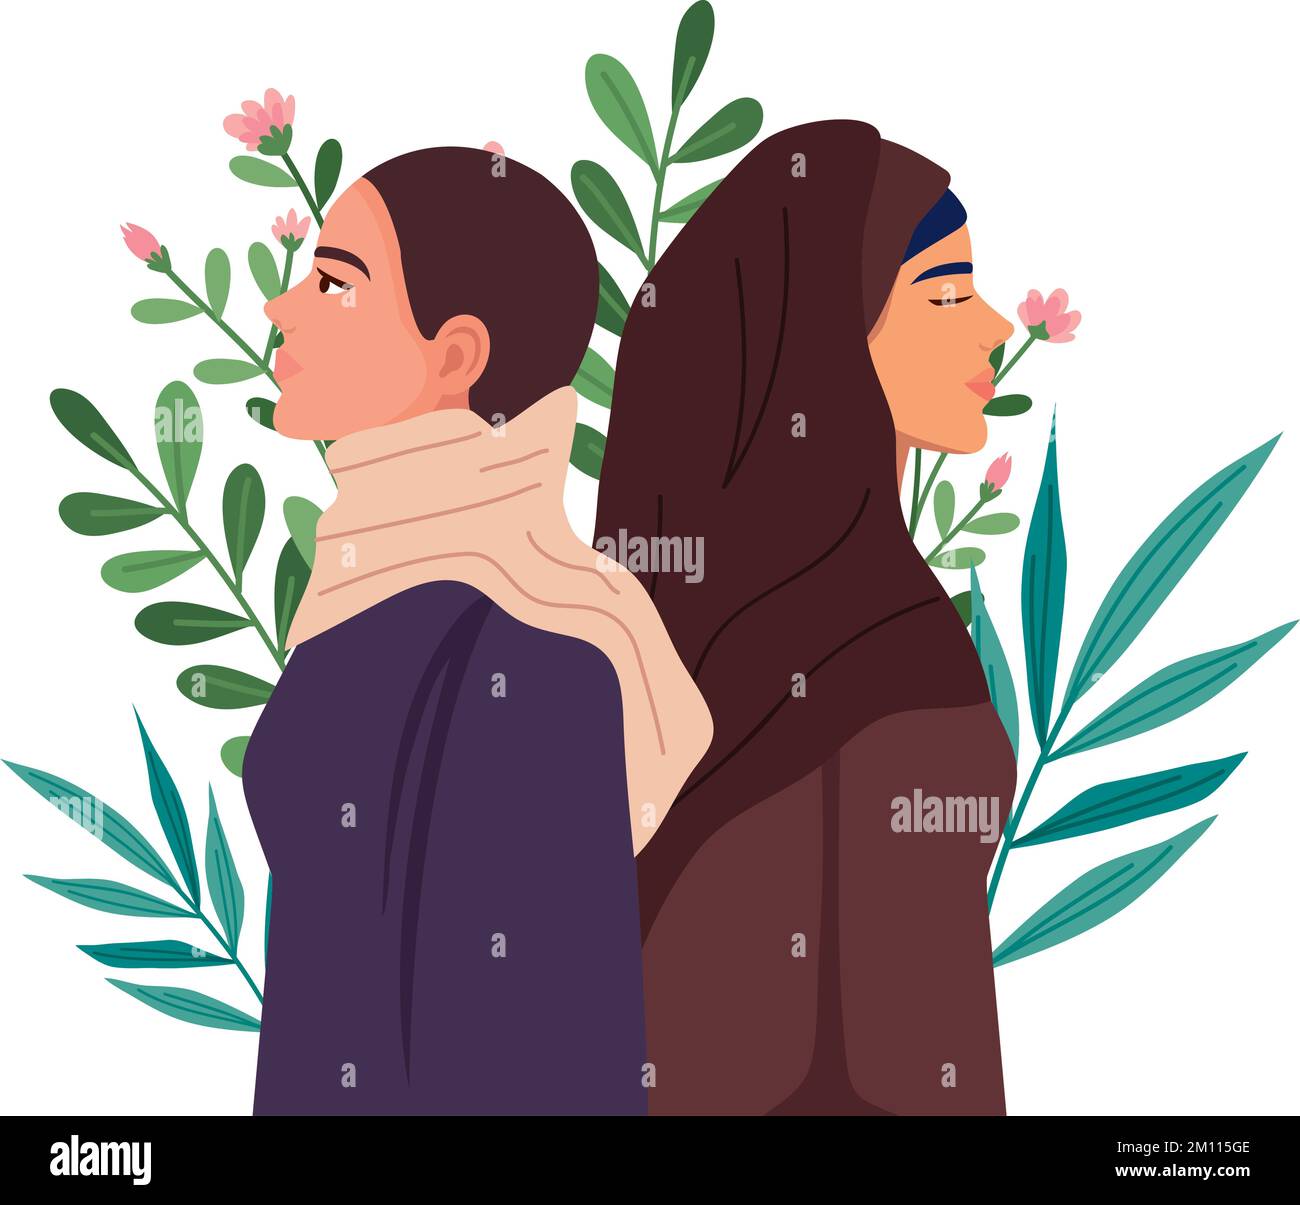 two iranian women characters Stock Vector